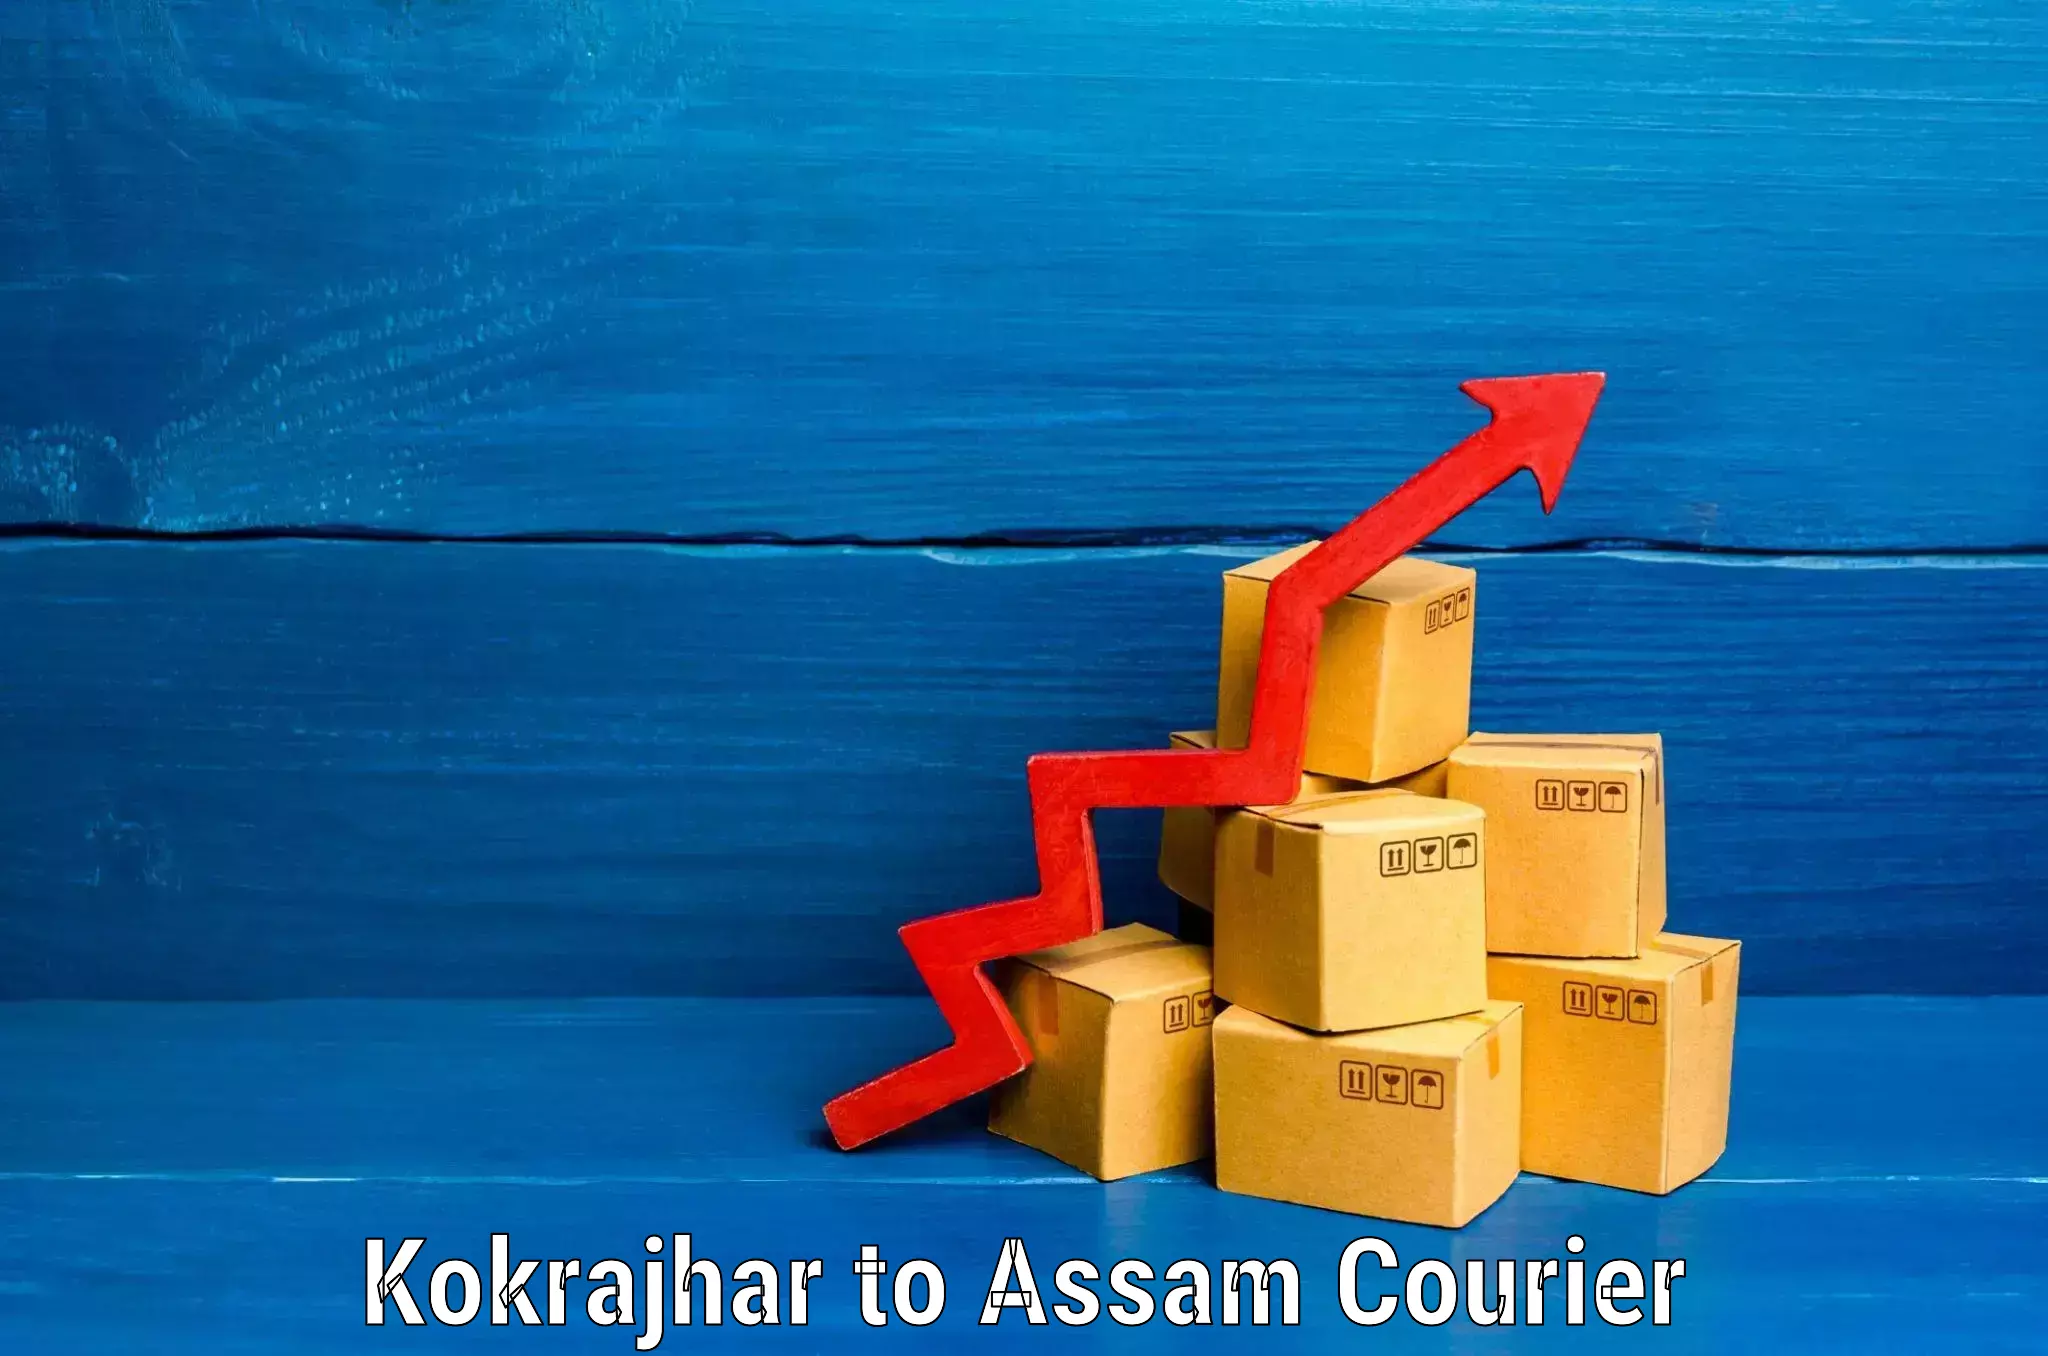 Luggage storage and delivery in Kokrajhar to Hojai